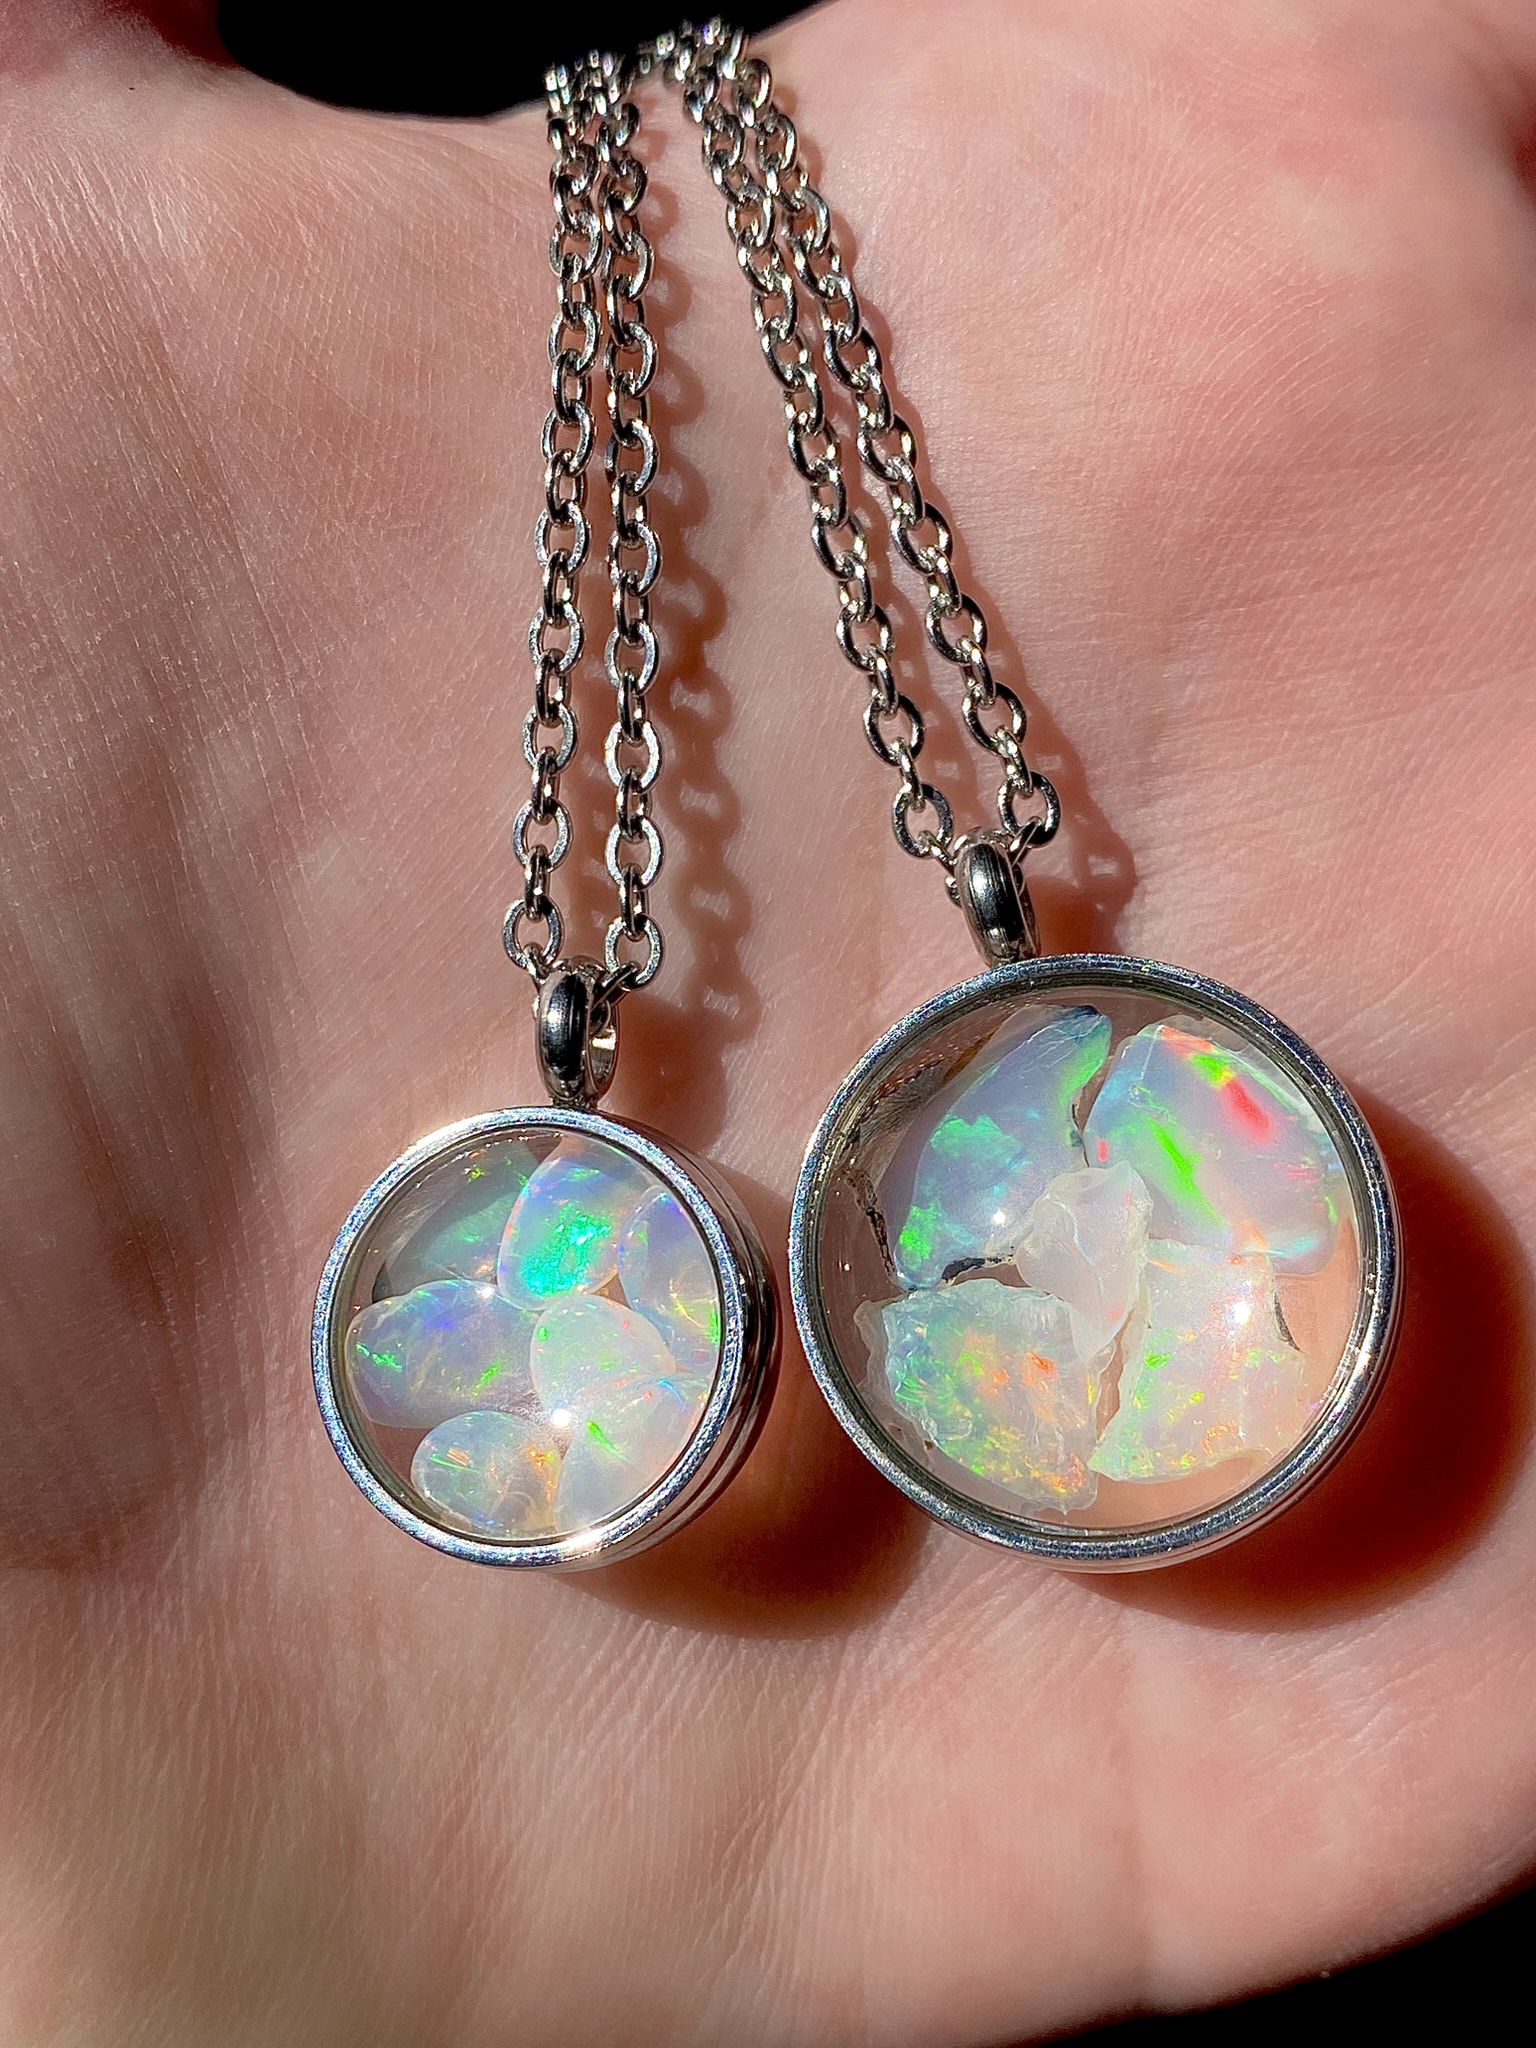 Natural Ethiopian Opals Inside Glass Locket Necklace, Stainless Steel, Floating Opal Necklace, Shaker Necklace, Opal Pendant Silver Chain